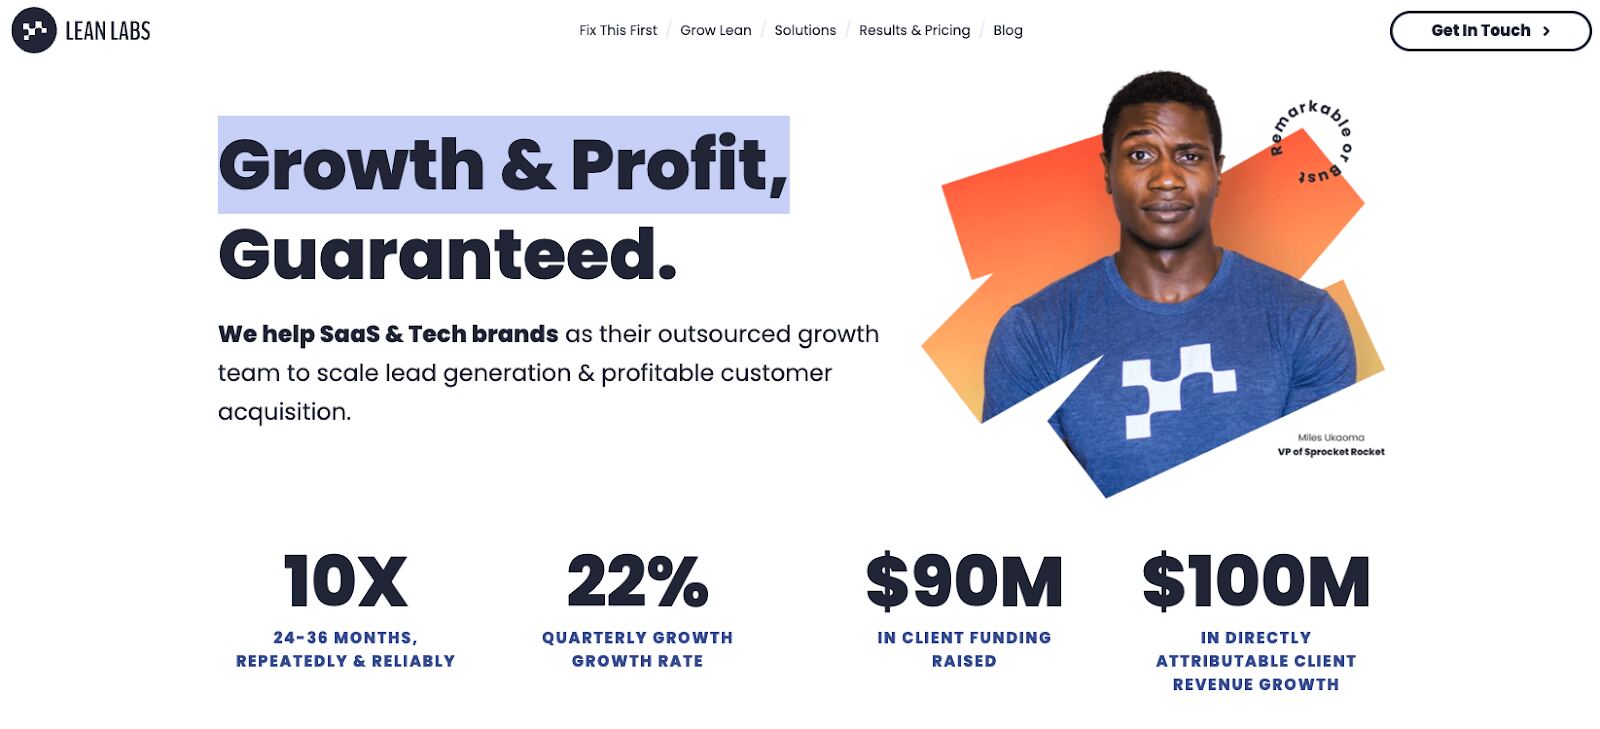  Lean Labs makes bold promises on their website and backs them up with stats